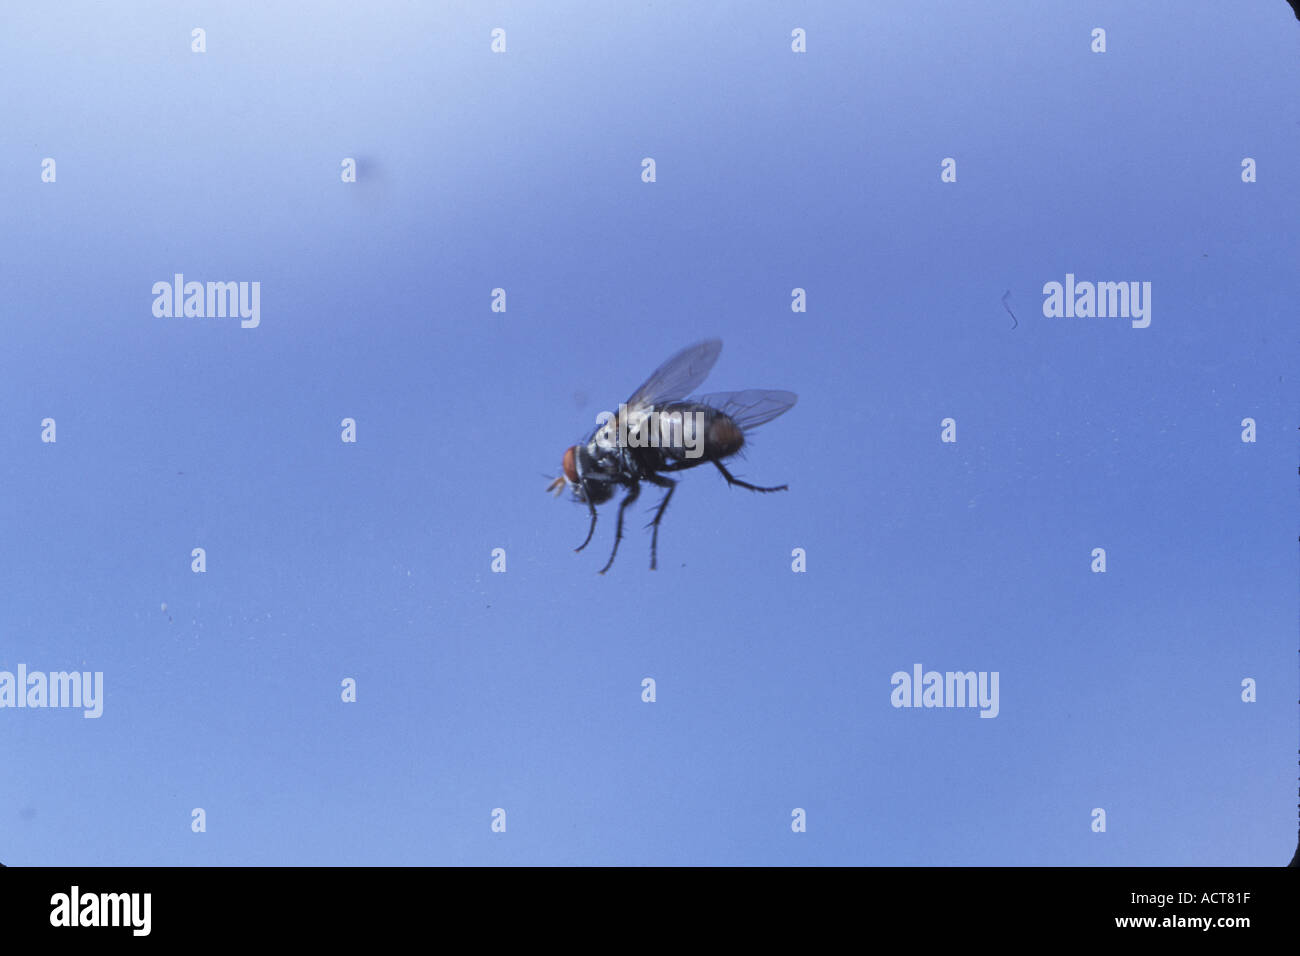 fly on a car window horse home anoying plague flies kill unwanted wanted food bother unfriendly discusting insect sky blue sma Stock Photo